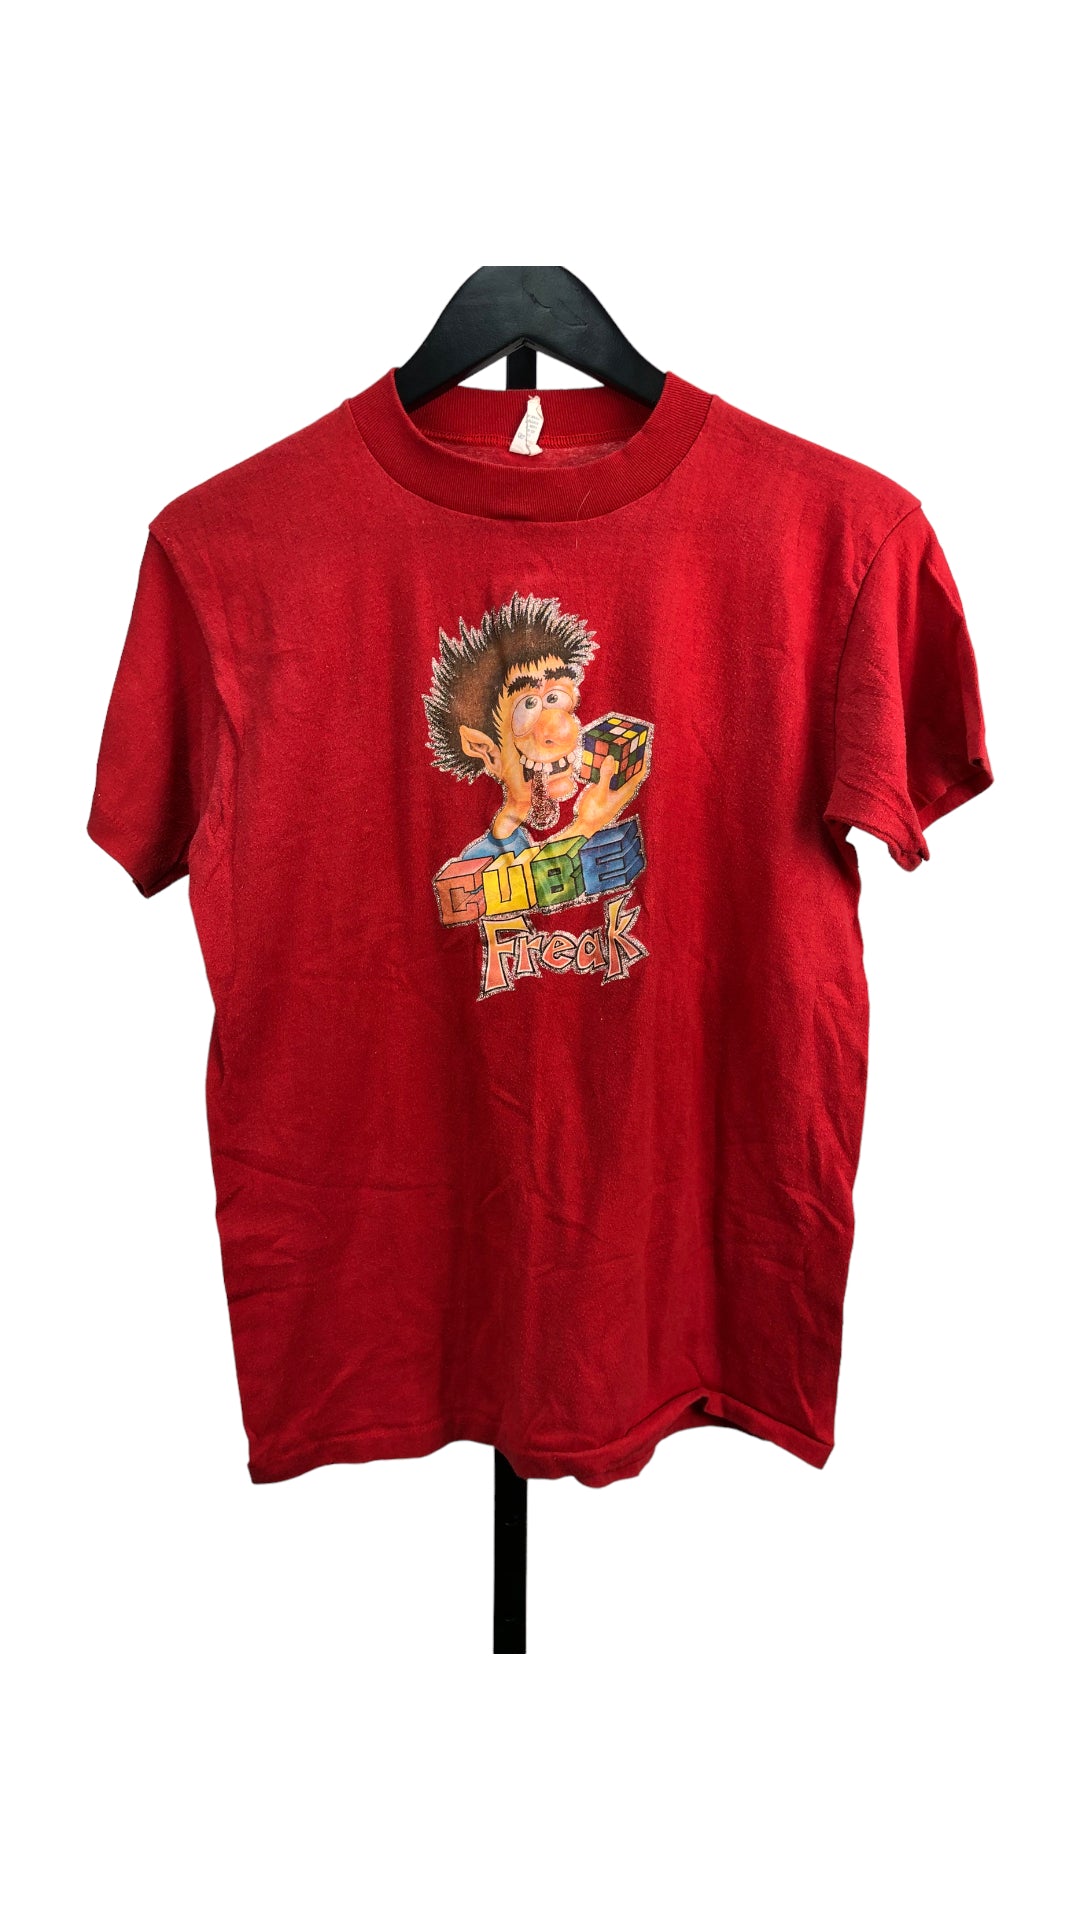 Load image into Gallery viewer, VTG Red Cube Freak Tee Sz M
